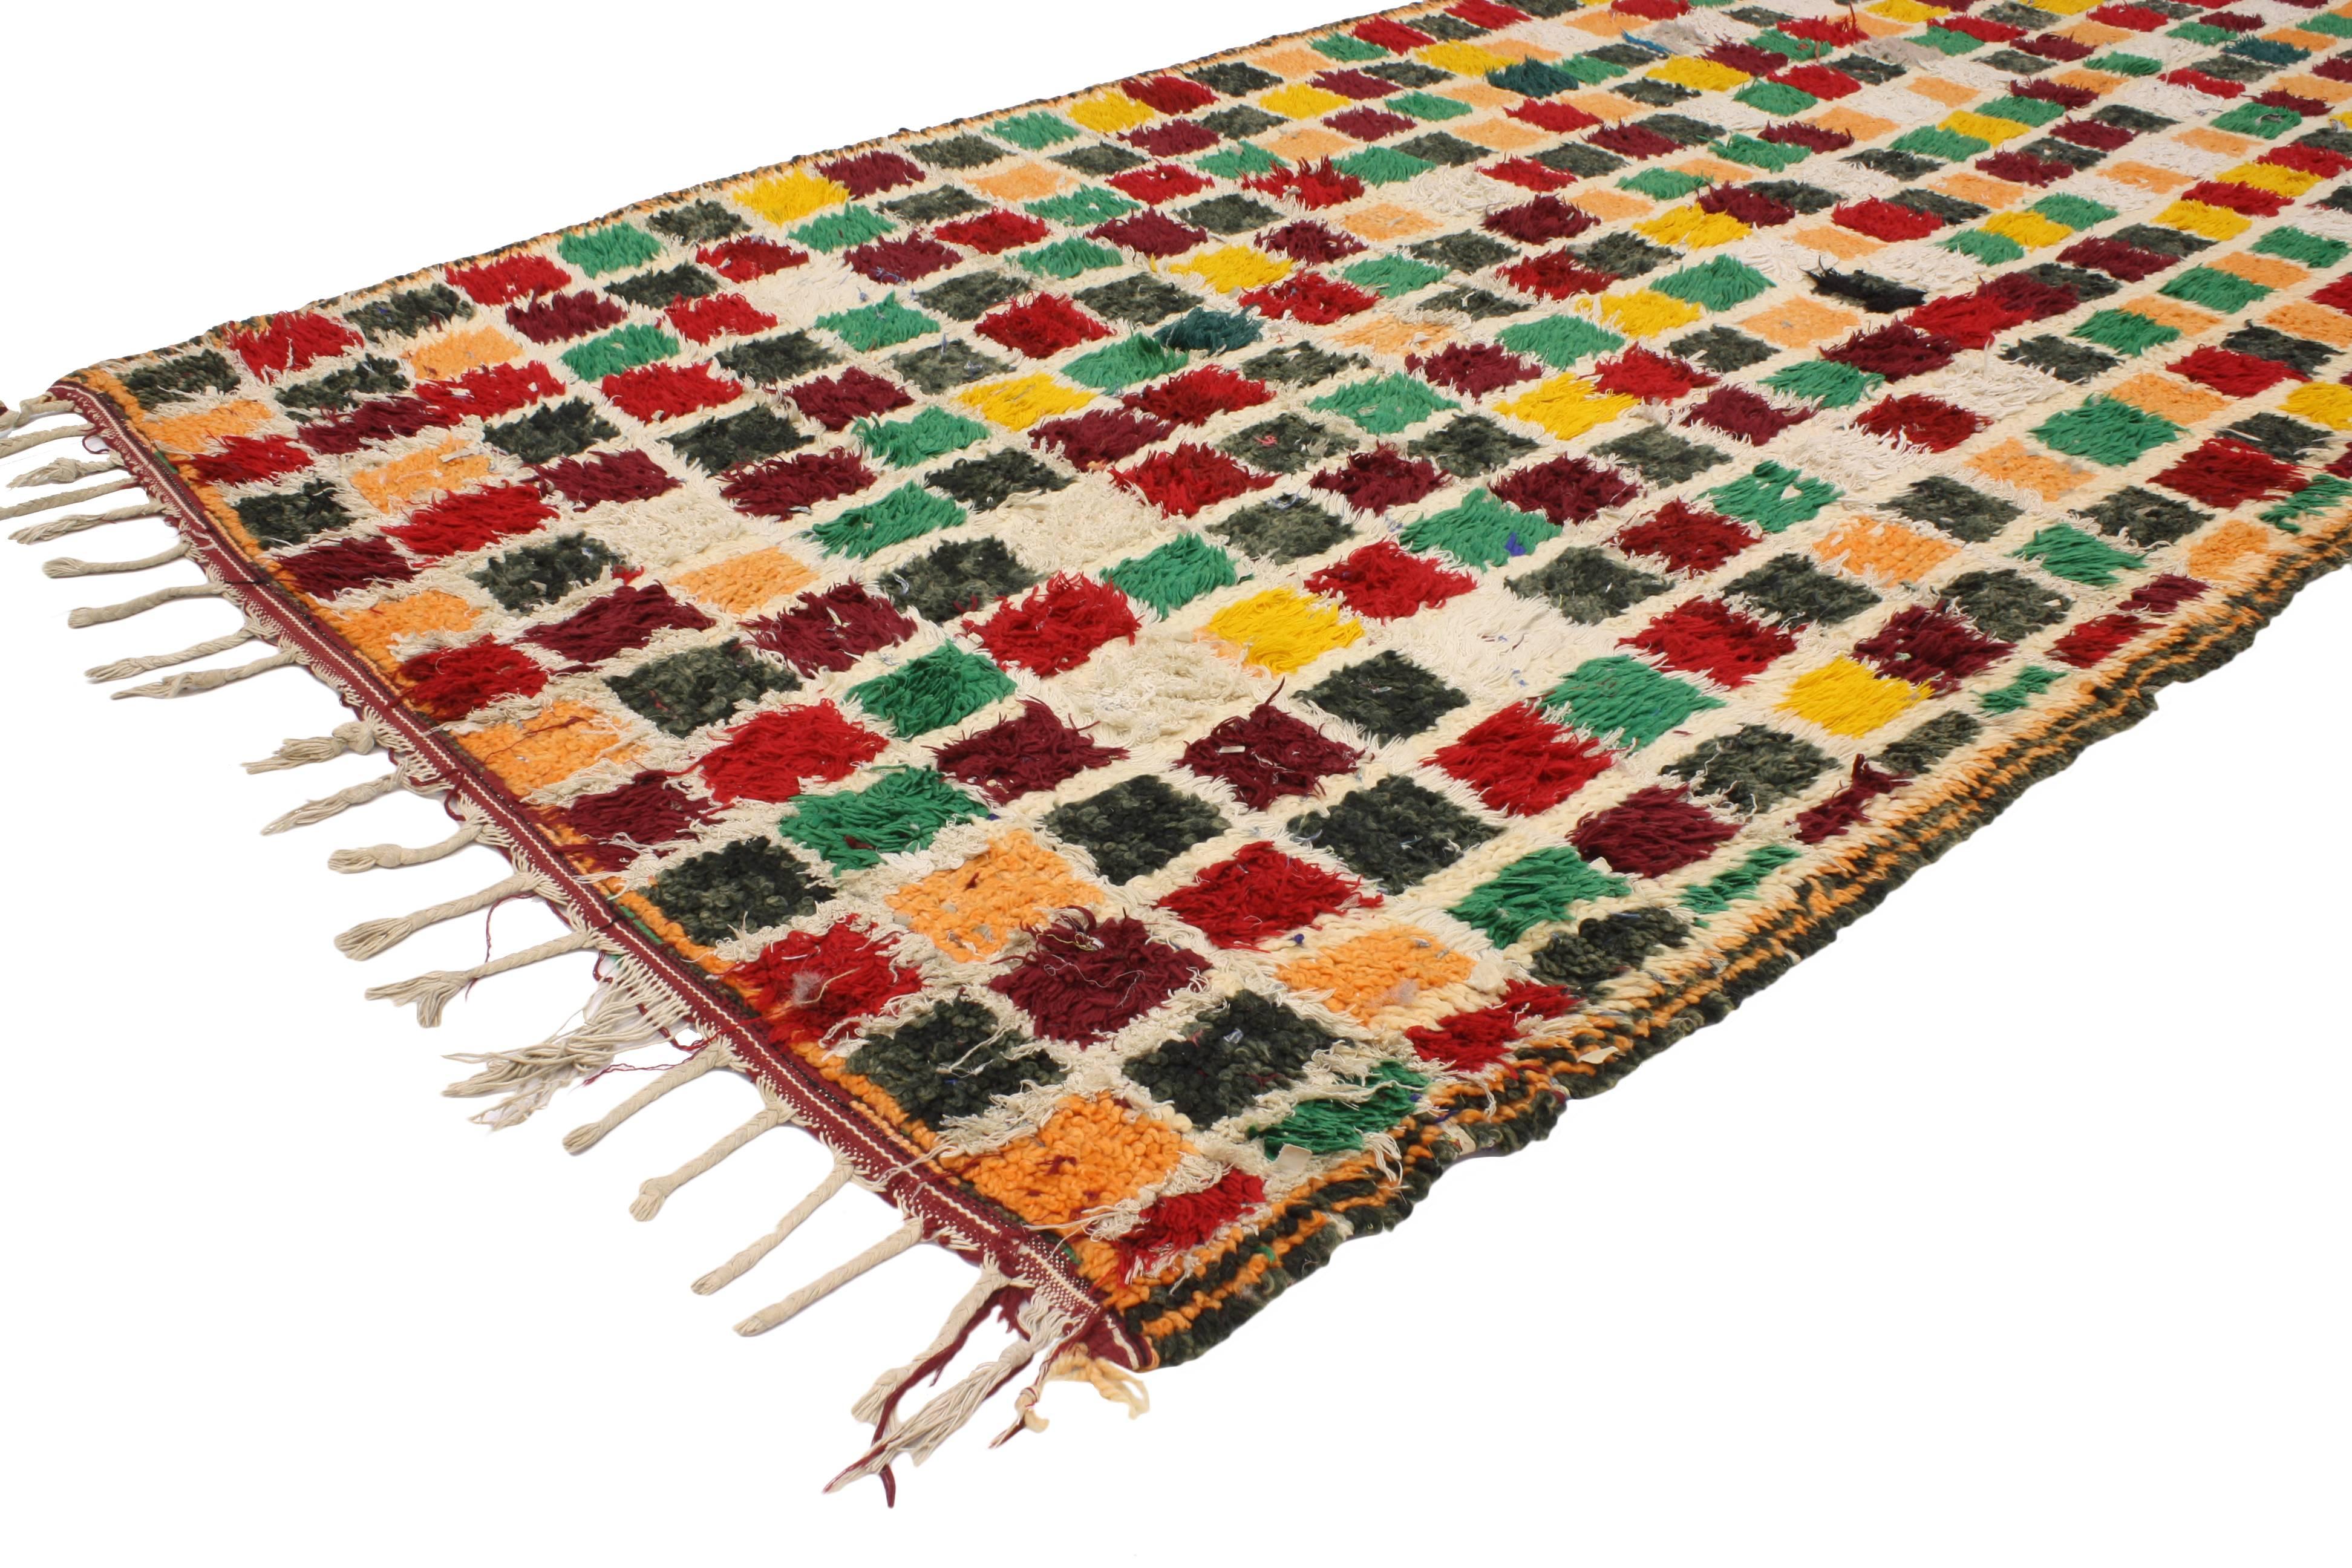 20473 Vintage Berber Moroccan Runner with Postmodern Bauhaus Cubism Style 04'05 x 08'09. This hand-knotted wool vintage Mid-Century Modern Moroccan runner features a checkerboard design woven in a striking combination of red, yellow, orange, green